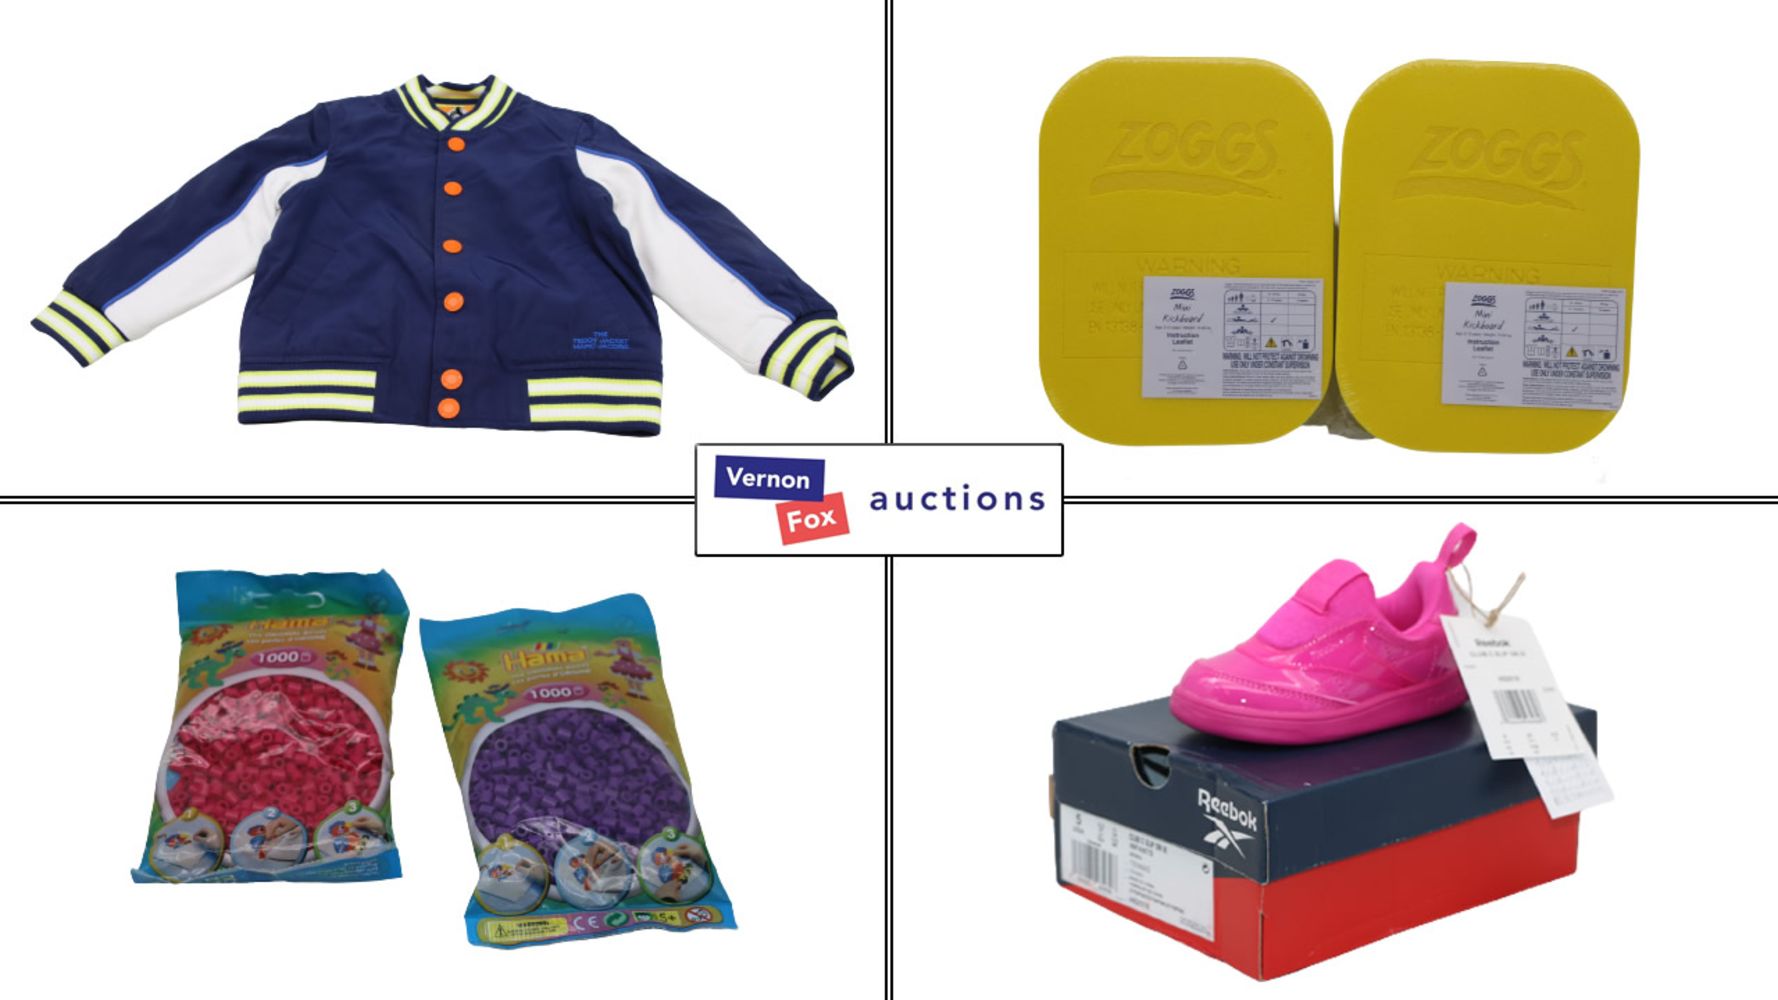 TIMED ONLINE AUCTION: Discounted Children's Items including Toys, Clothing and Shoes, plus Pet Care Goods, with FREE UK DELIVERY!